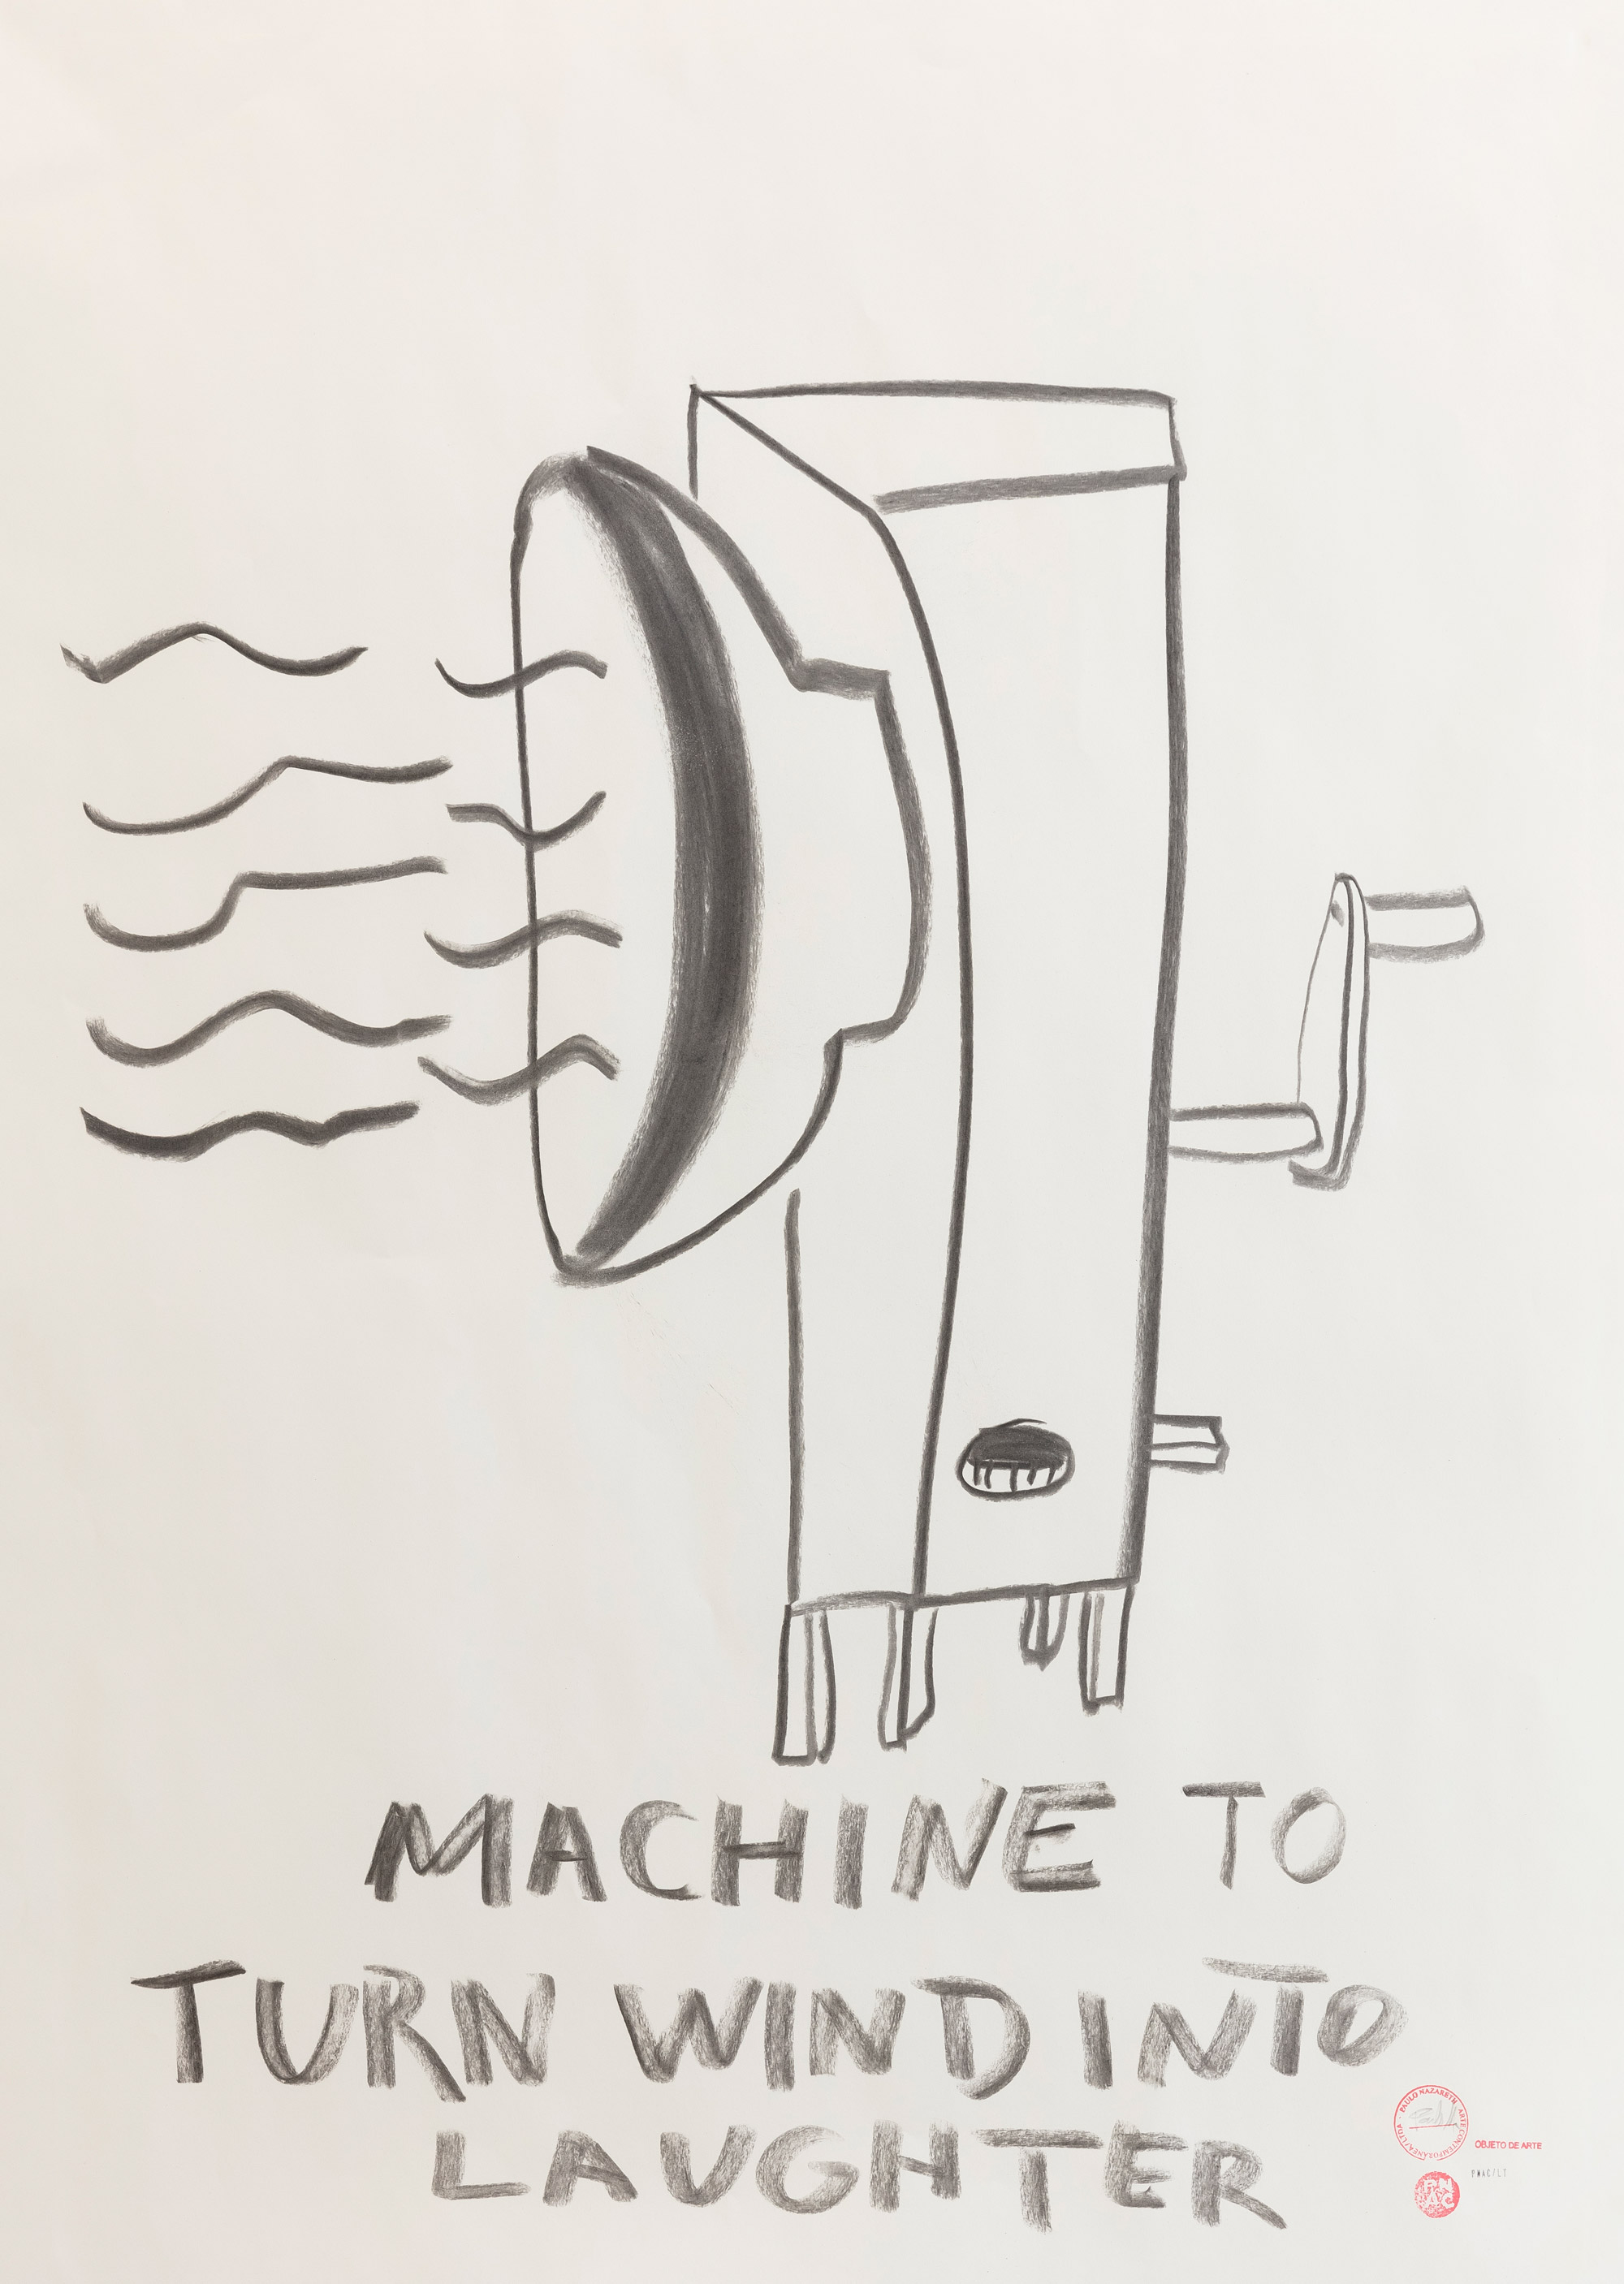  - MACHINE TO TURN WIND INTO LAUGHTER, 2019